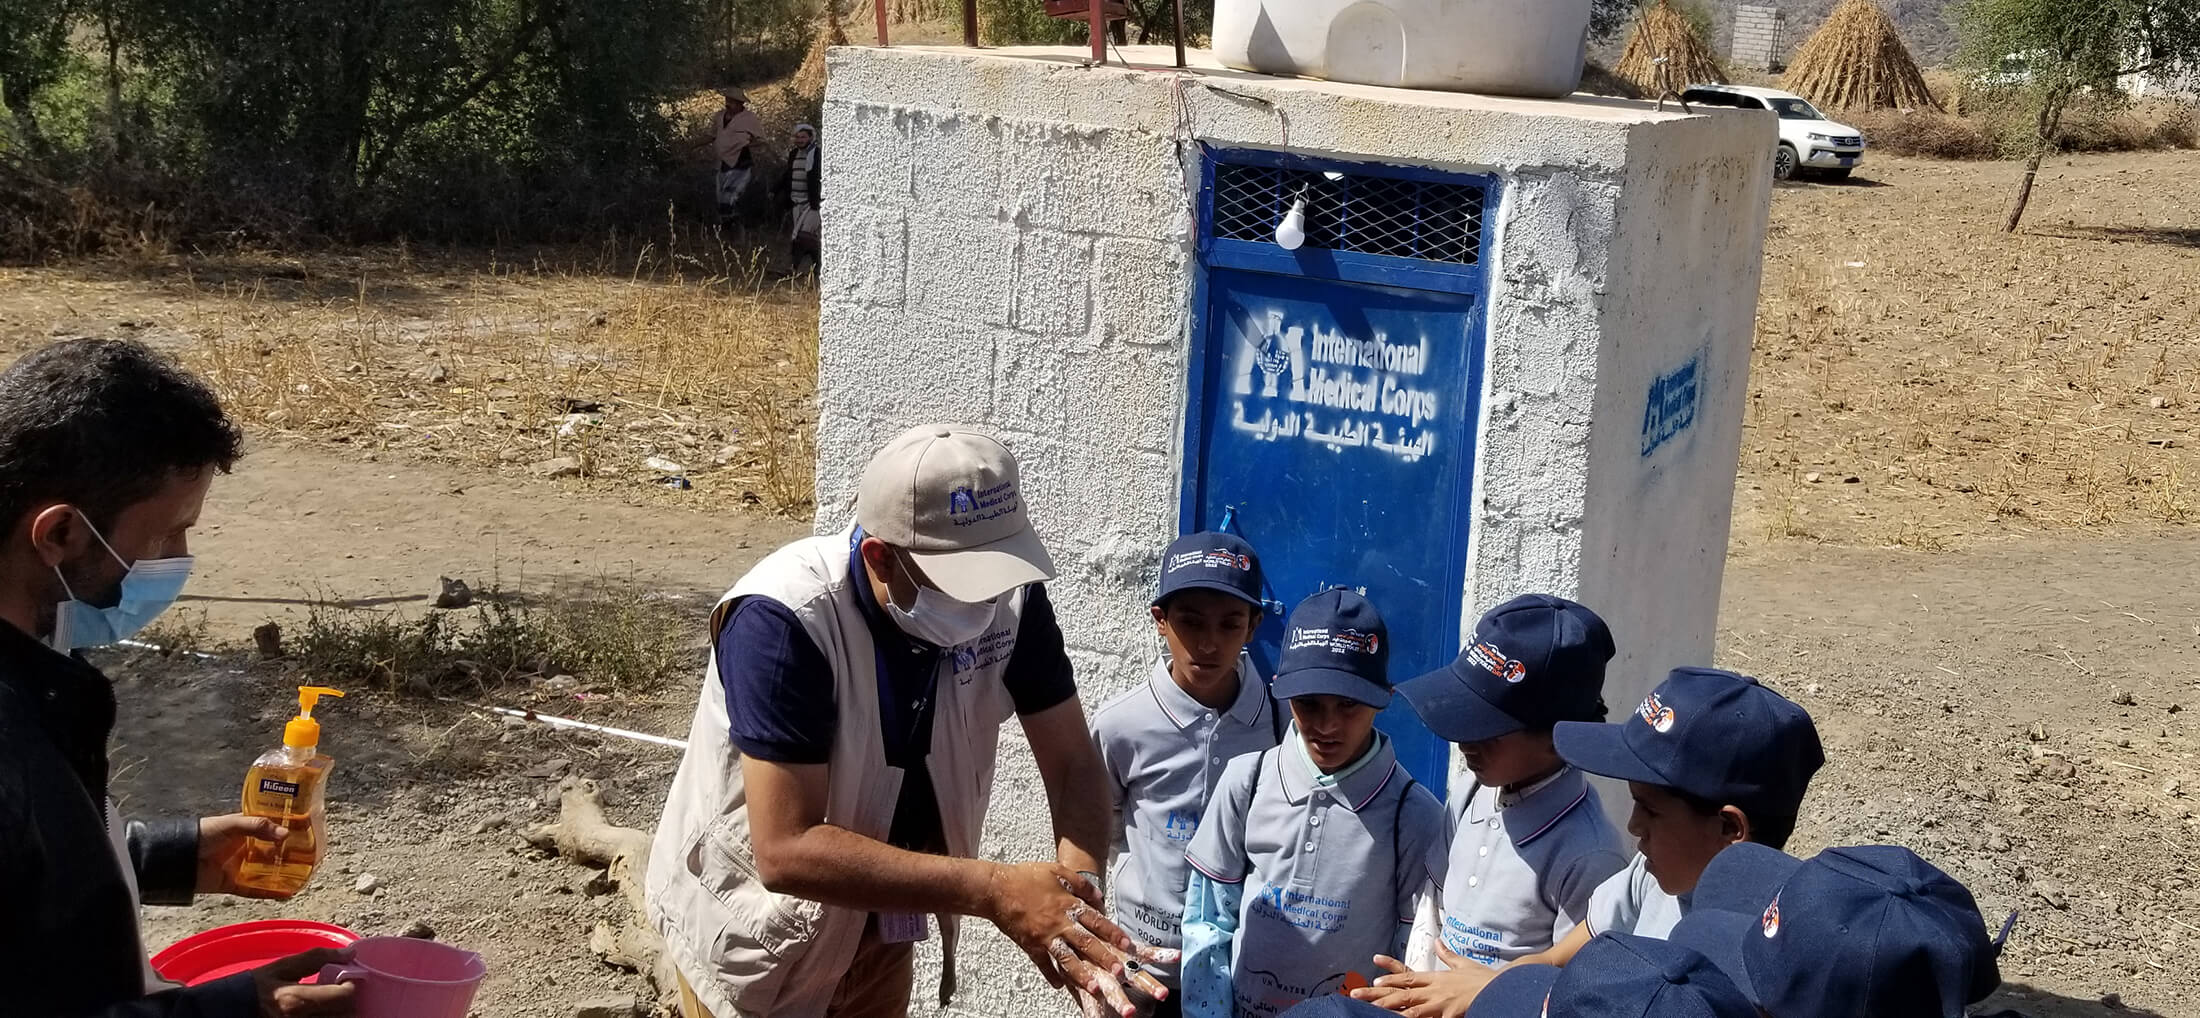 Children in Alkorshoob village learn how to use a new water point, where they can now access clean water to wash their hands without leaving their village.